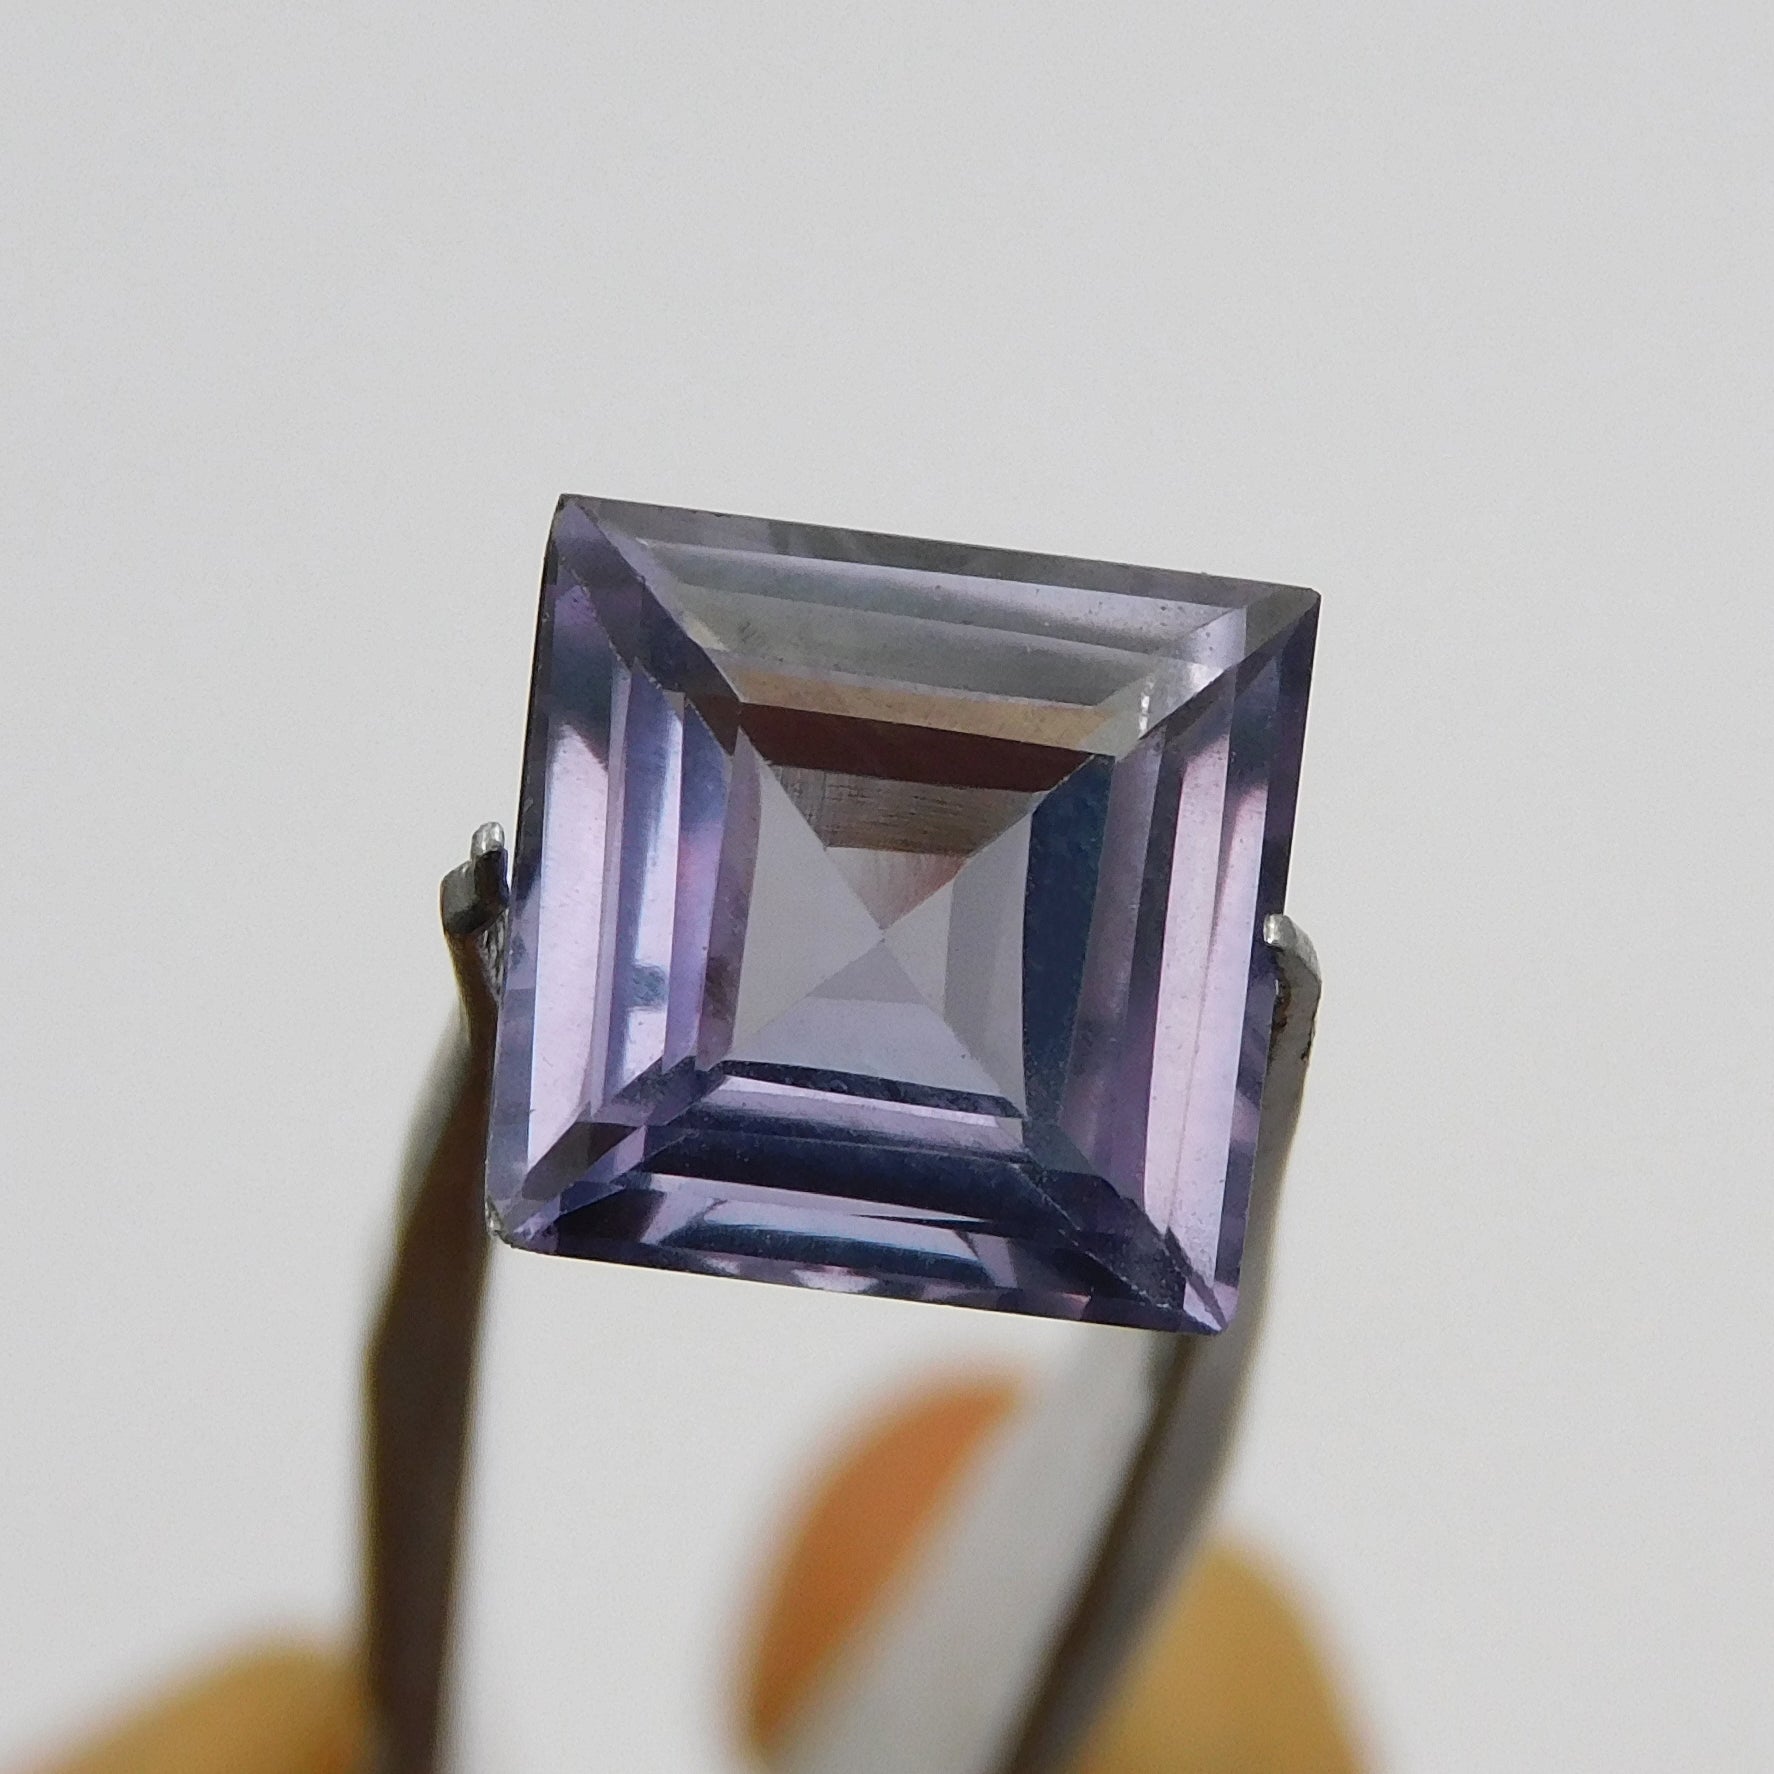 Beautiful Alexandrite Stone !! Square Cut CERTIFIED Natural 5.20 Ct Color Change Alexandrite Loose Gemstone | Gift For Her/ Him